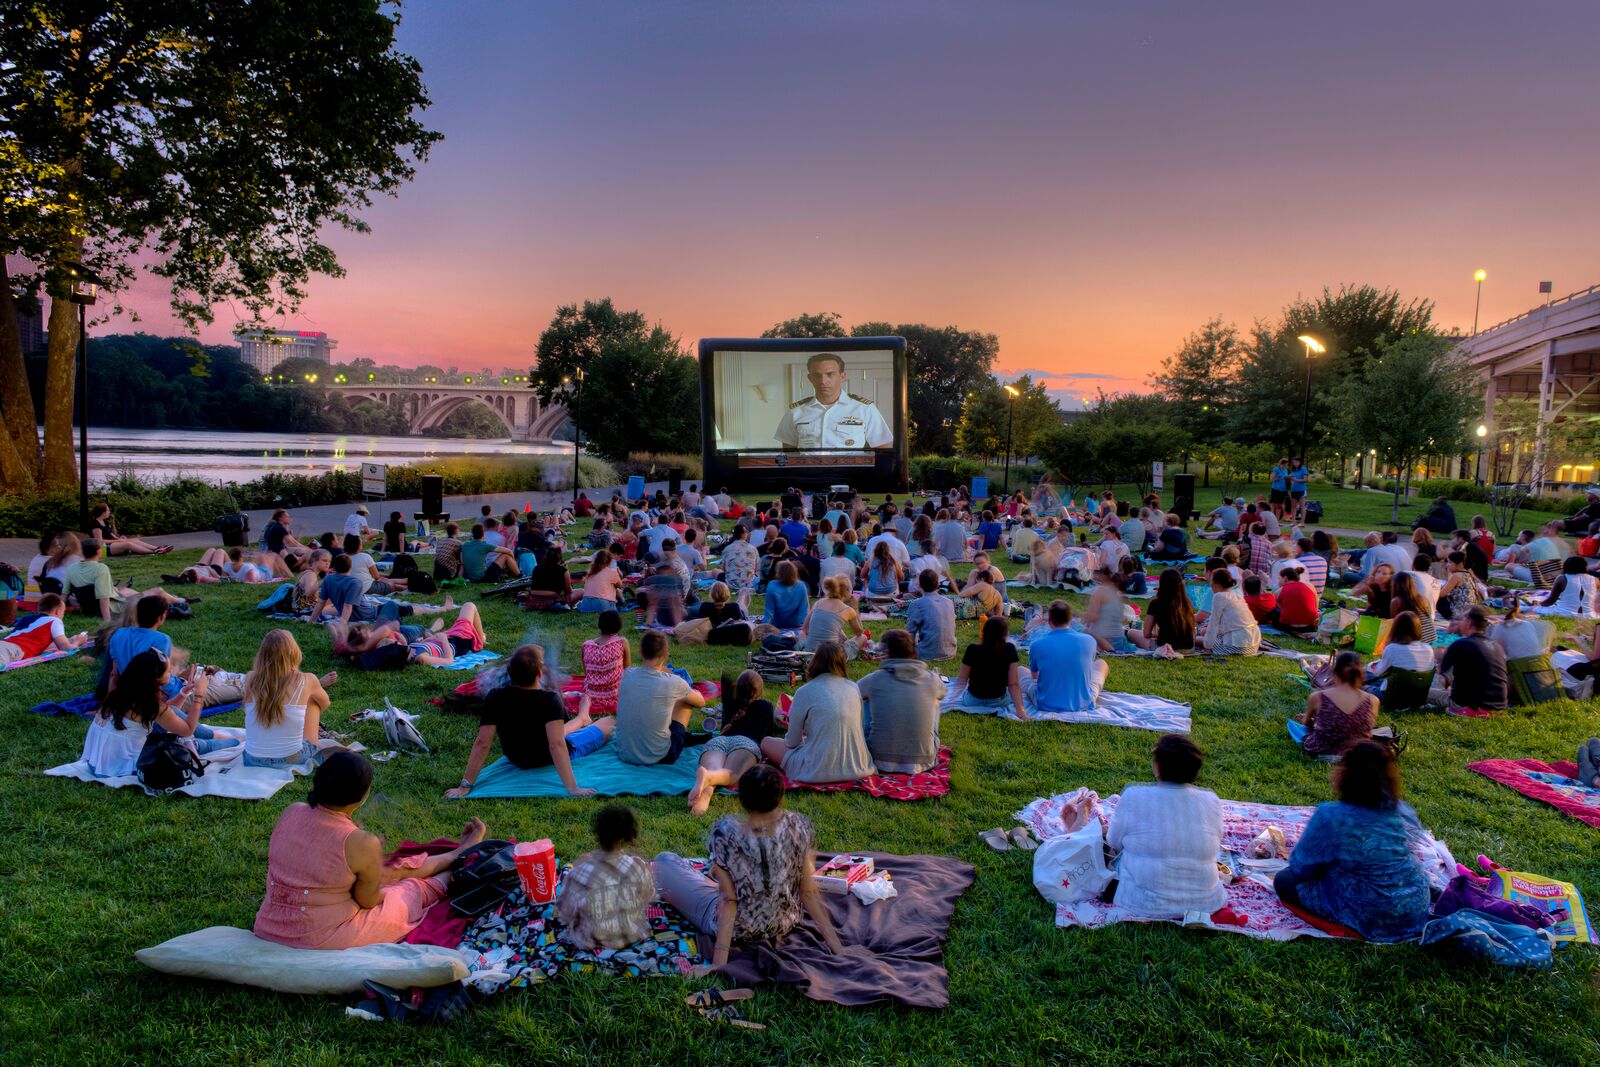 Moviegoers watch a sunset screening at Georgetown Waterfront Park. (Courtesy Georgetown Sunset Cinema)